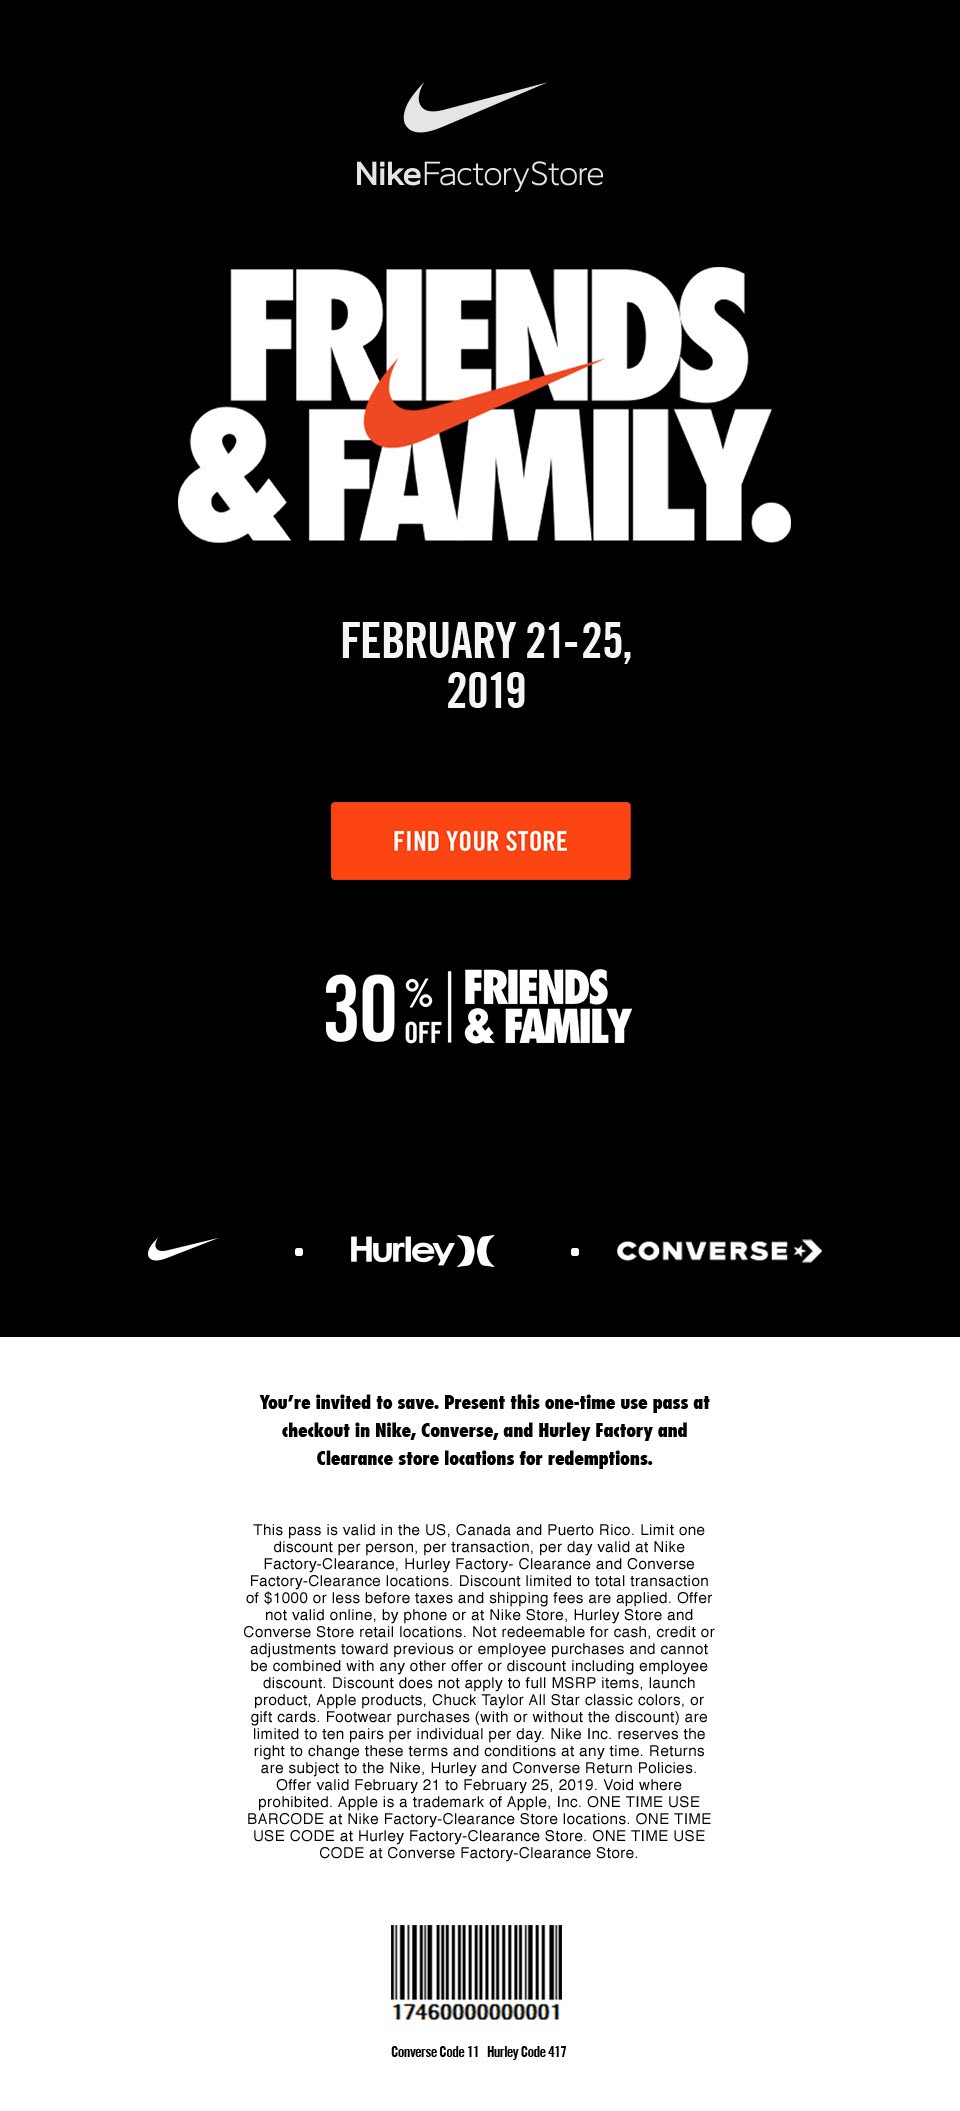 nike friends and family discount 2019 